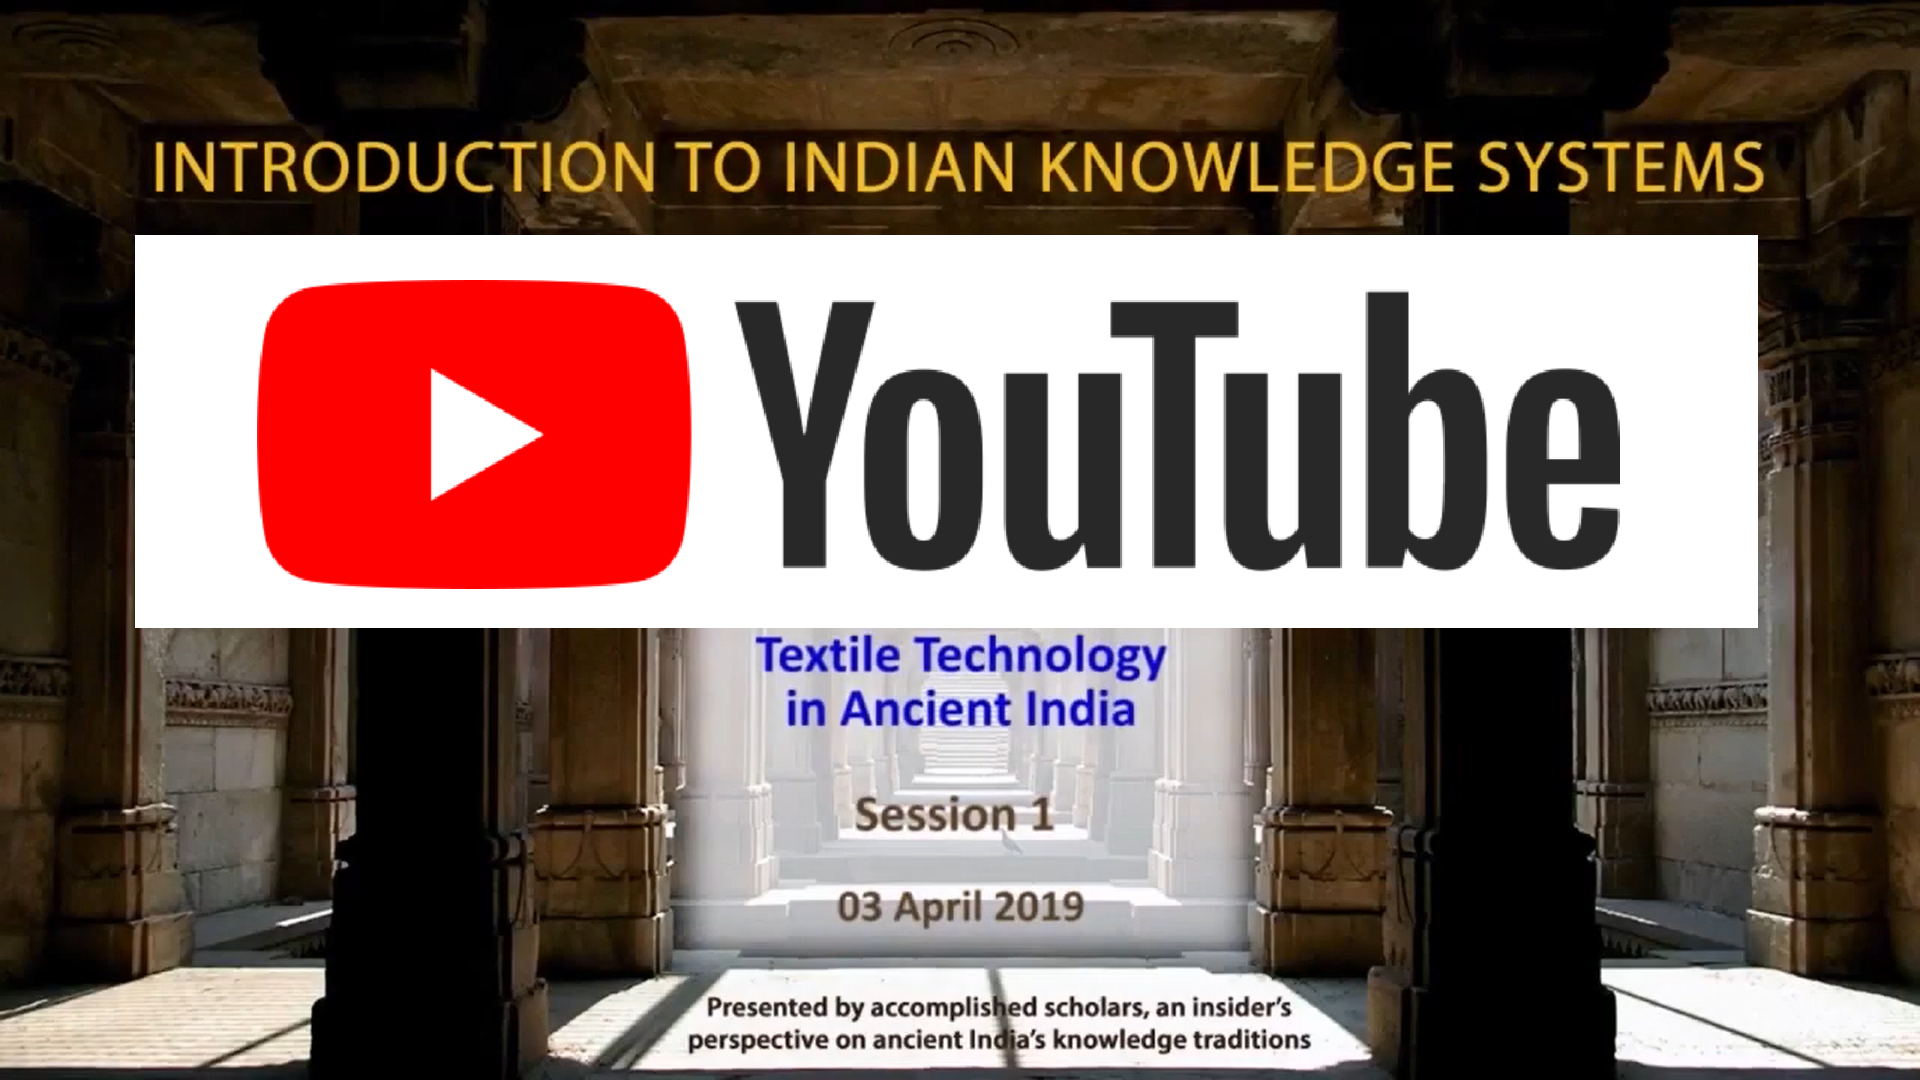 Textile Technology in ancient India (1) 03 April 2019